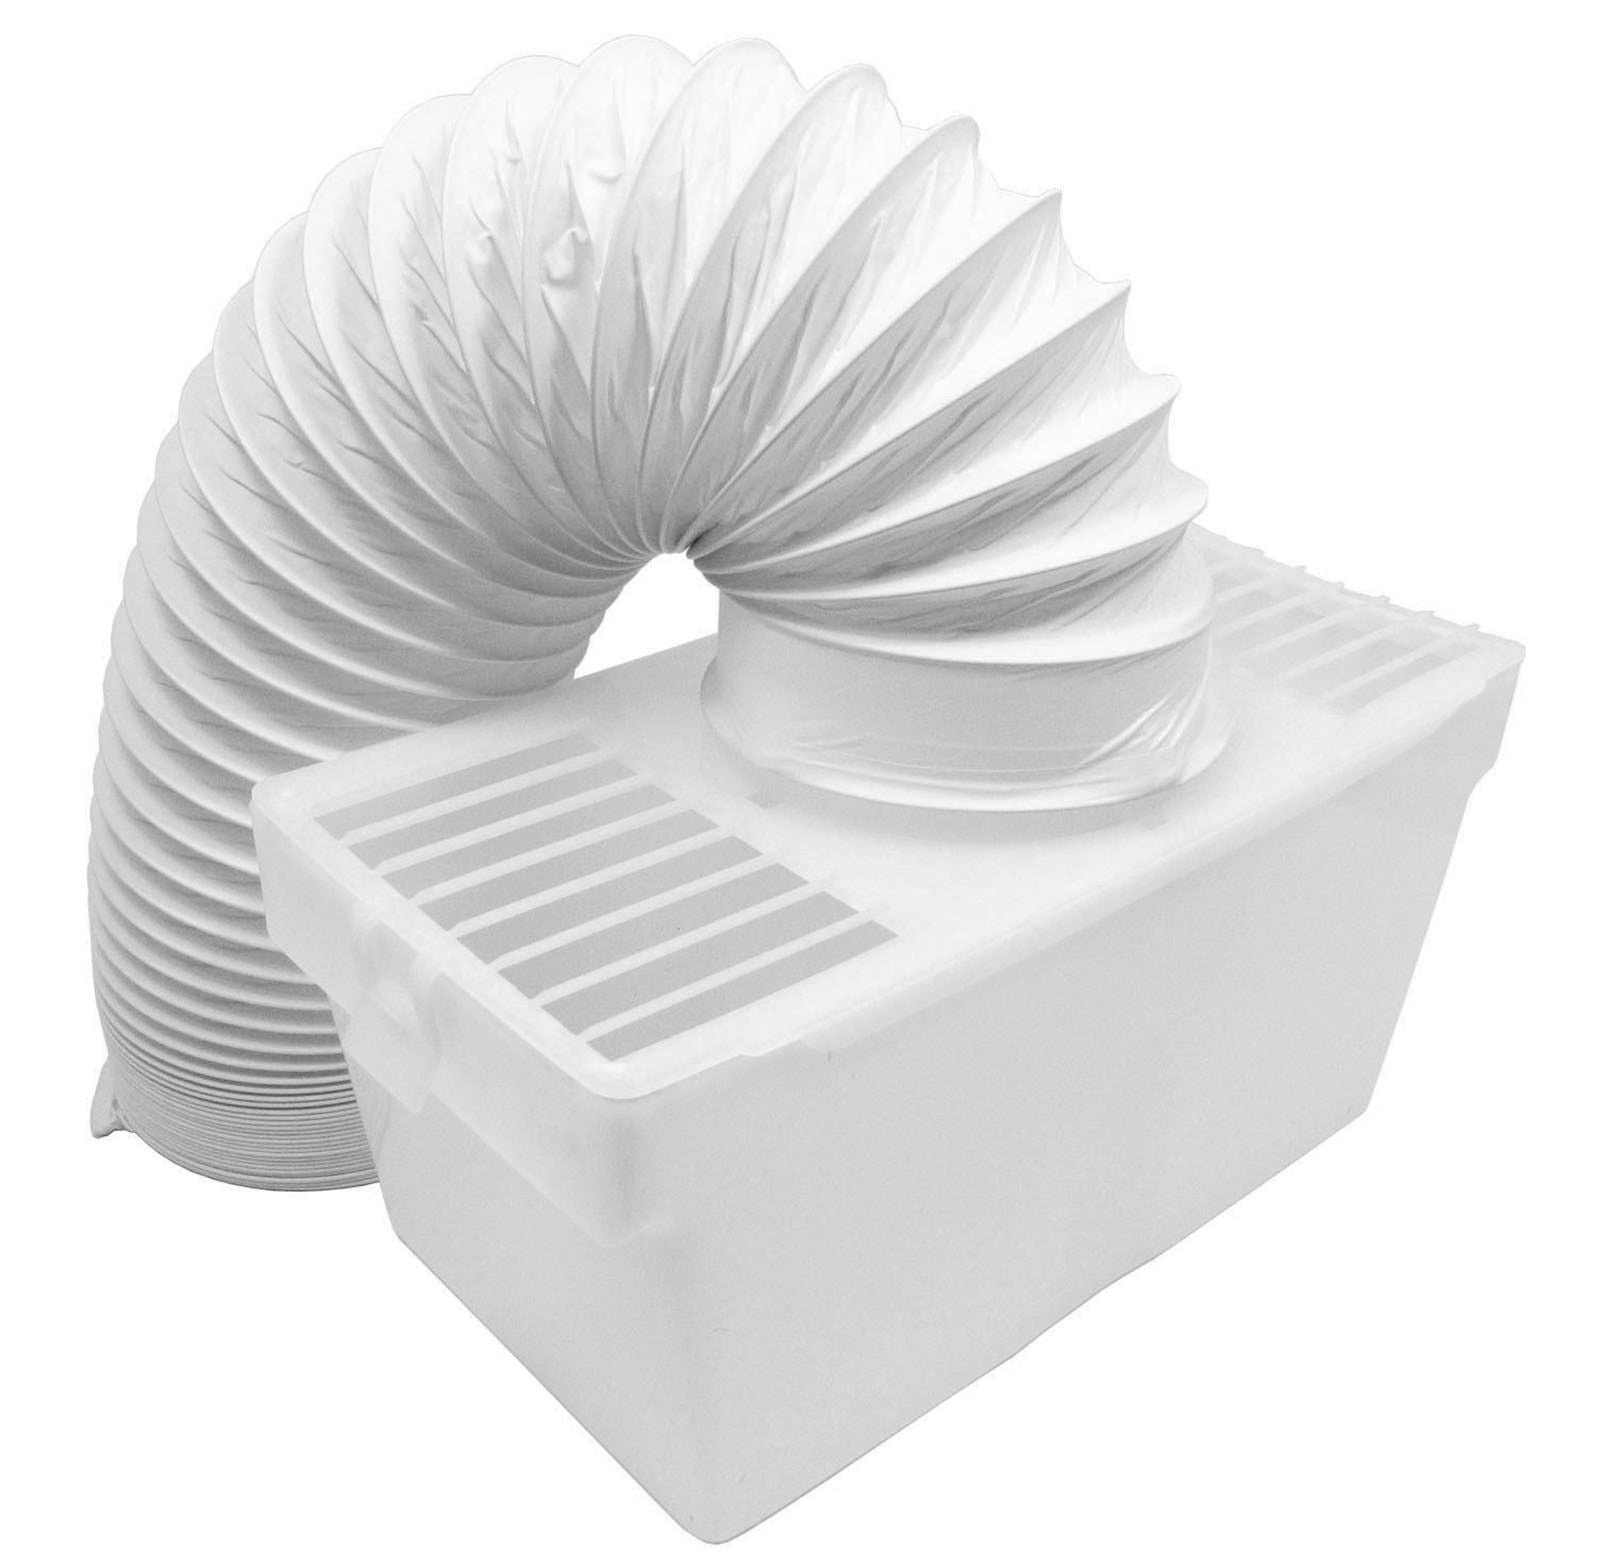 Condenser Vent Box & Hose Kit With Screw Clip for White Knight Vented Tumble Dryer (4" / 100mm Diameter)